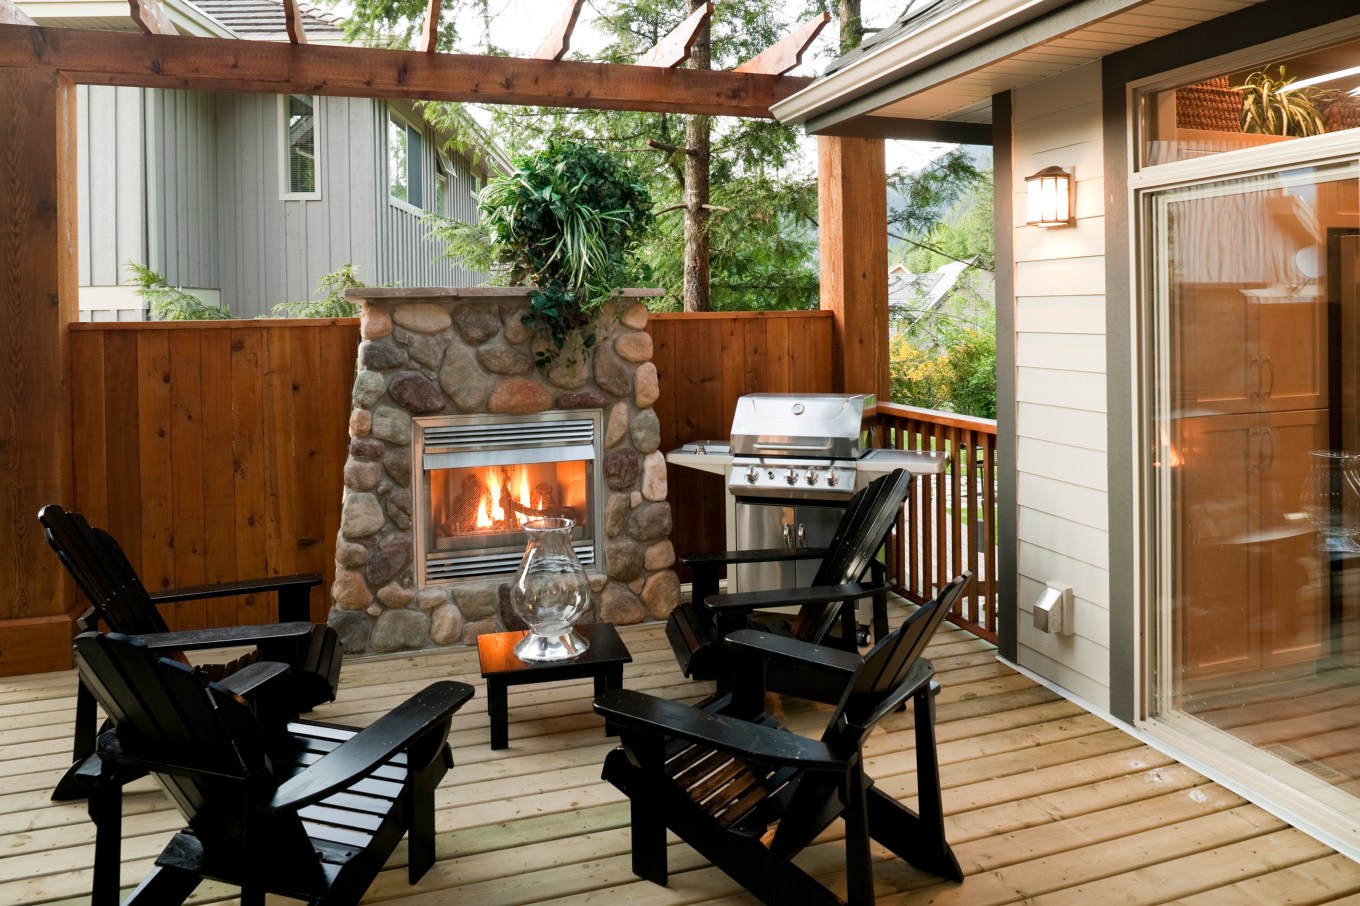 An outdoor fireplace close to a house on a wooden deck.